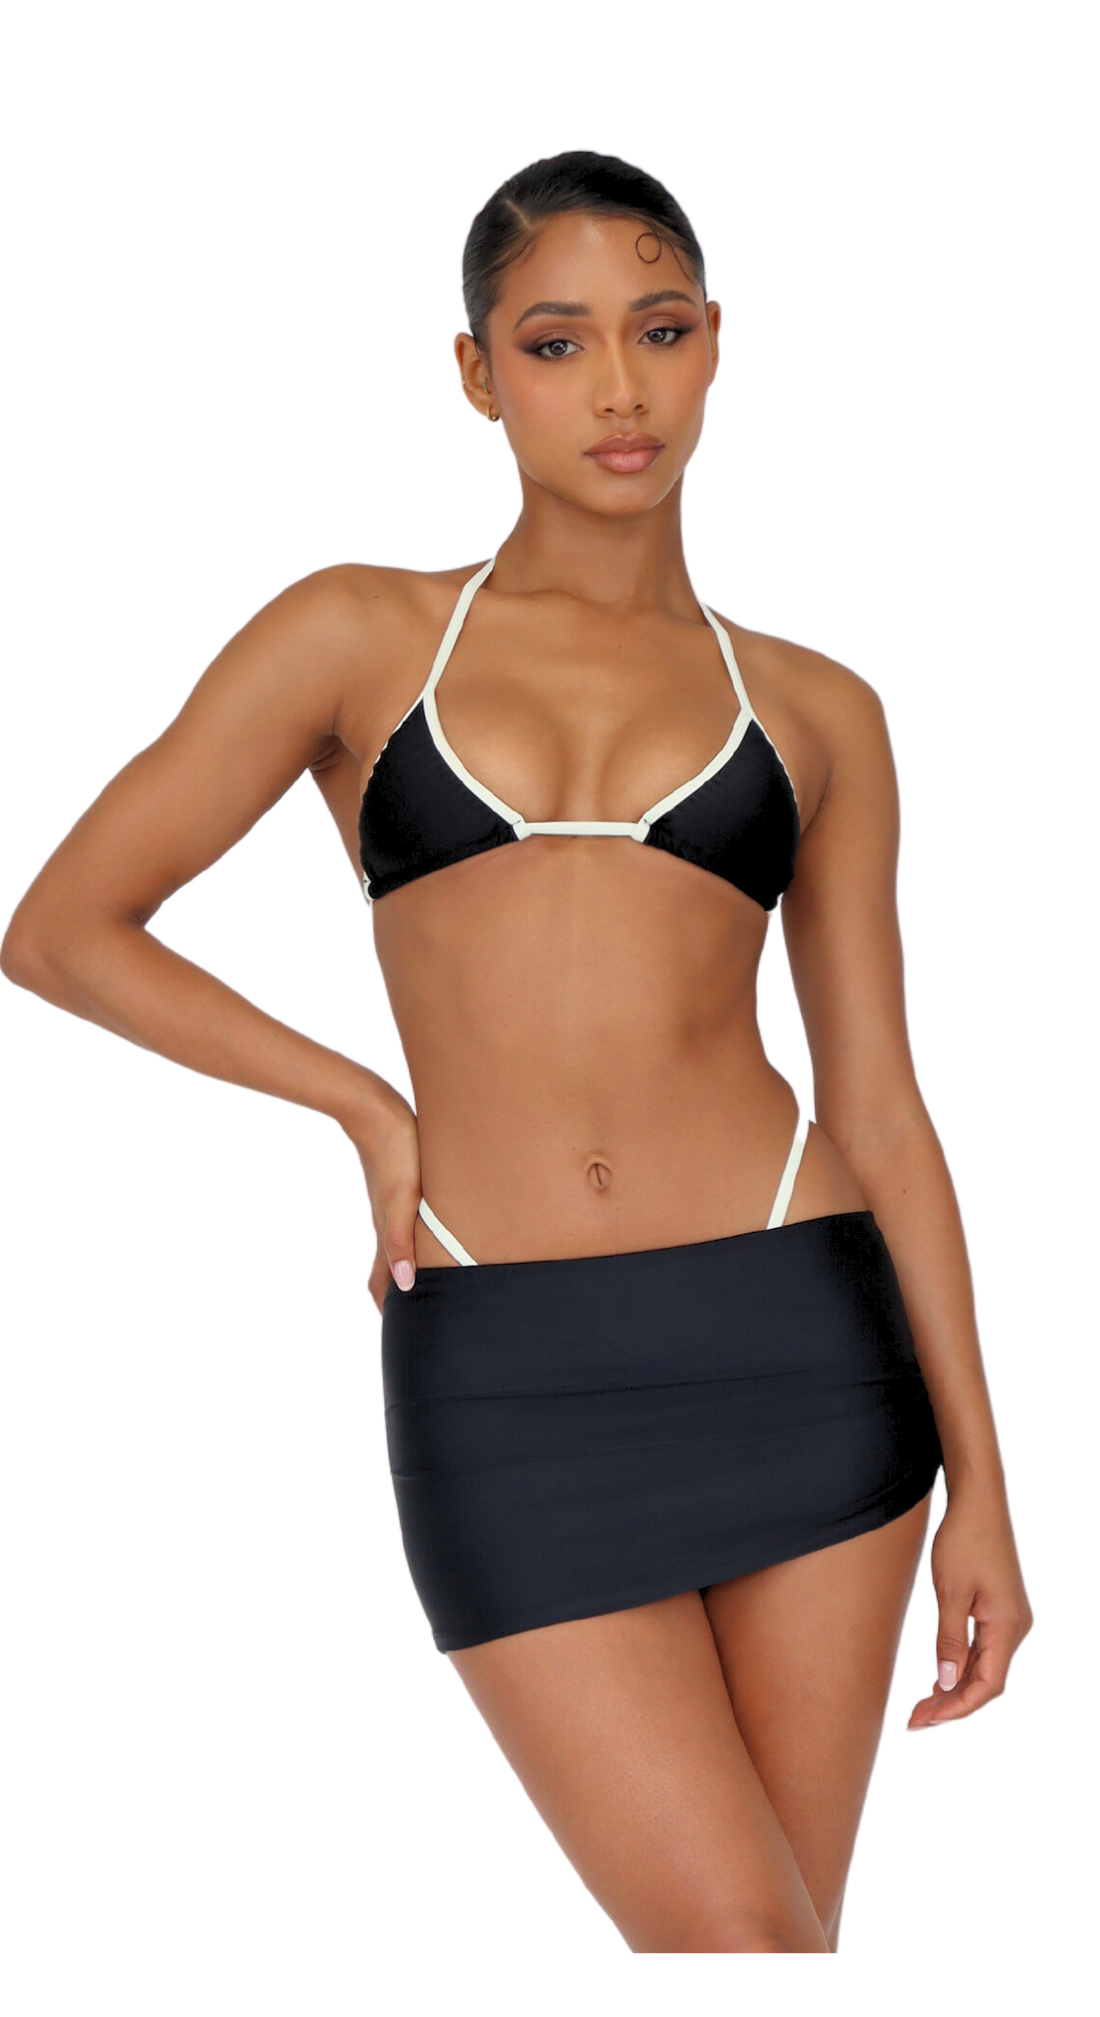 HALLE TRIANGLE TOP - BLACK/IVORY